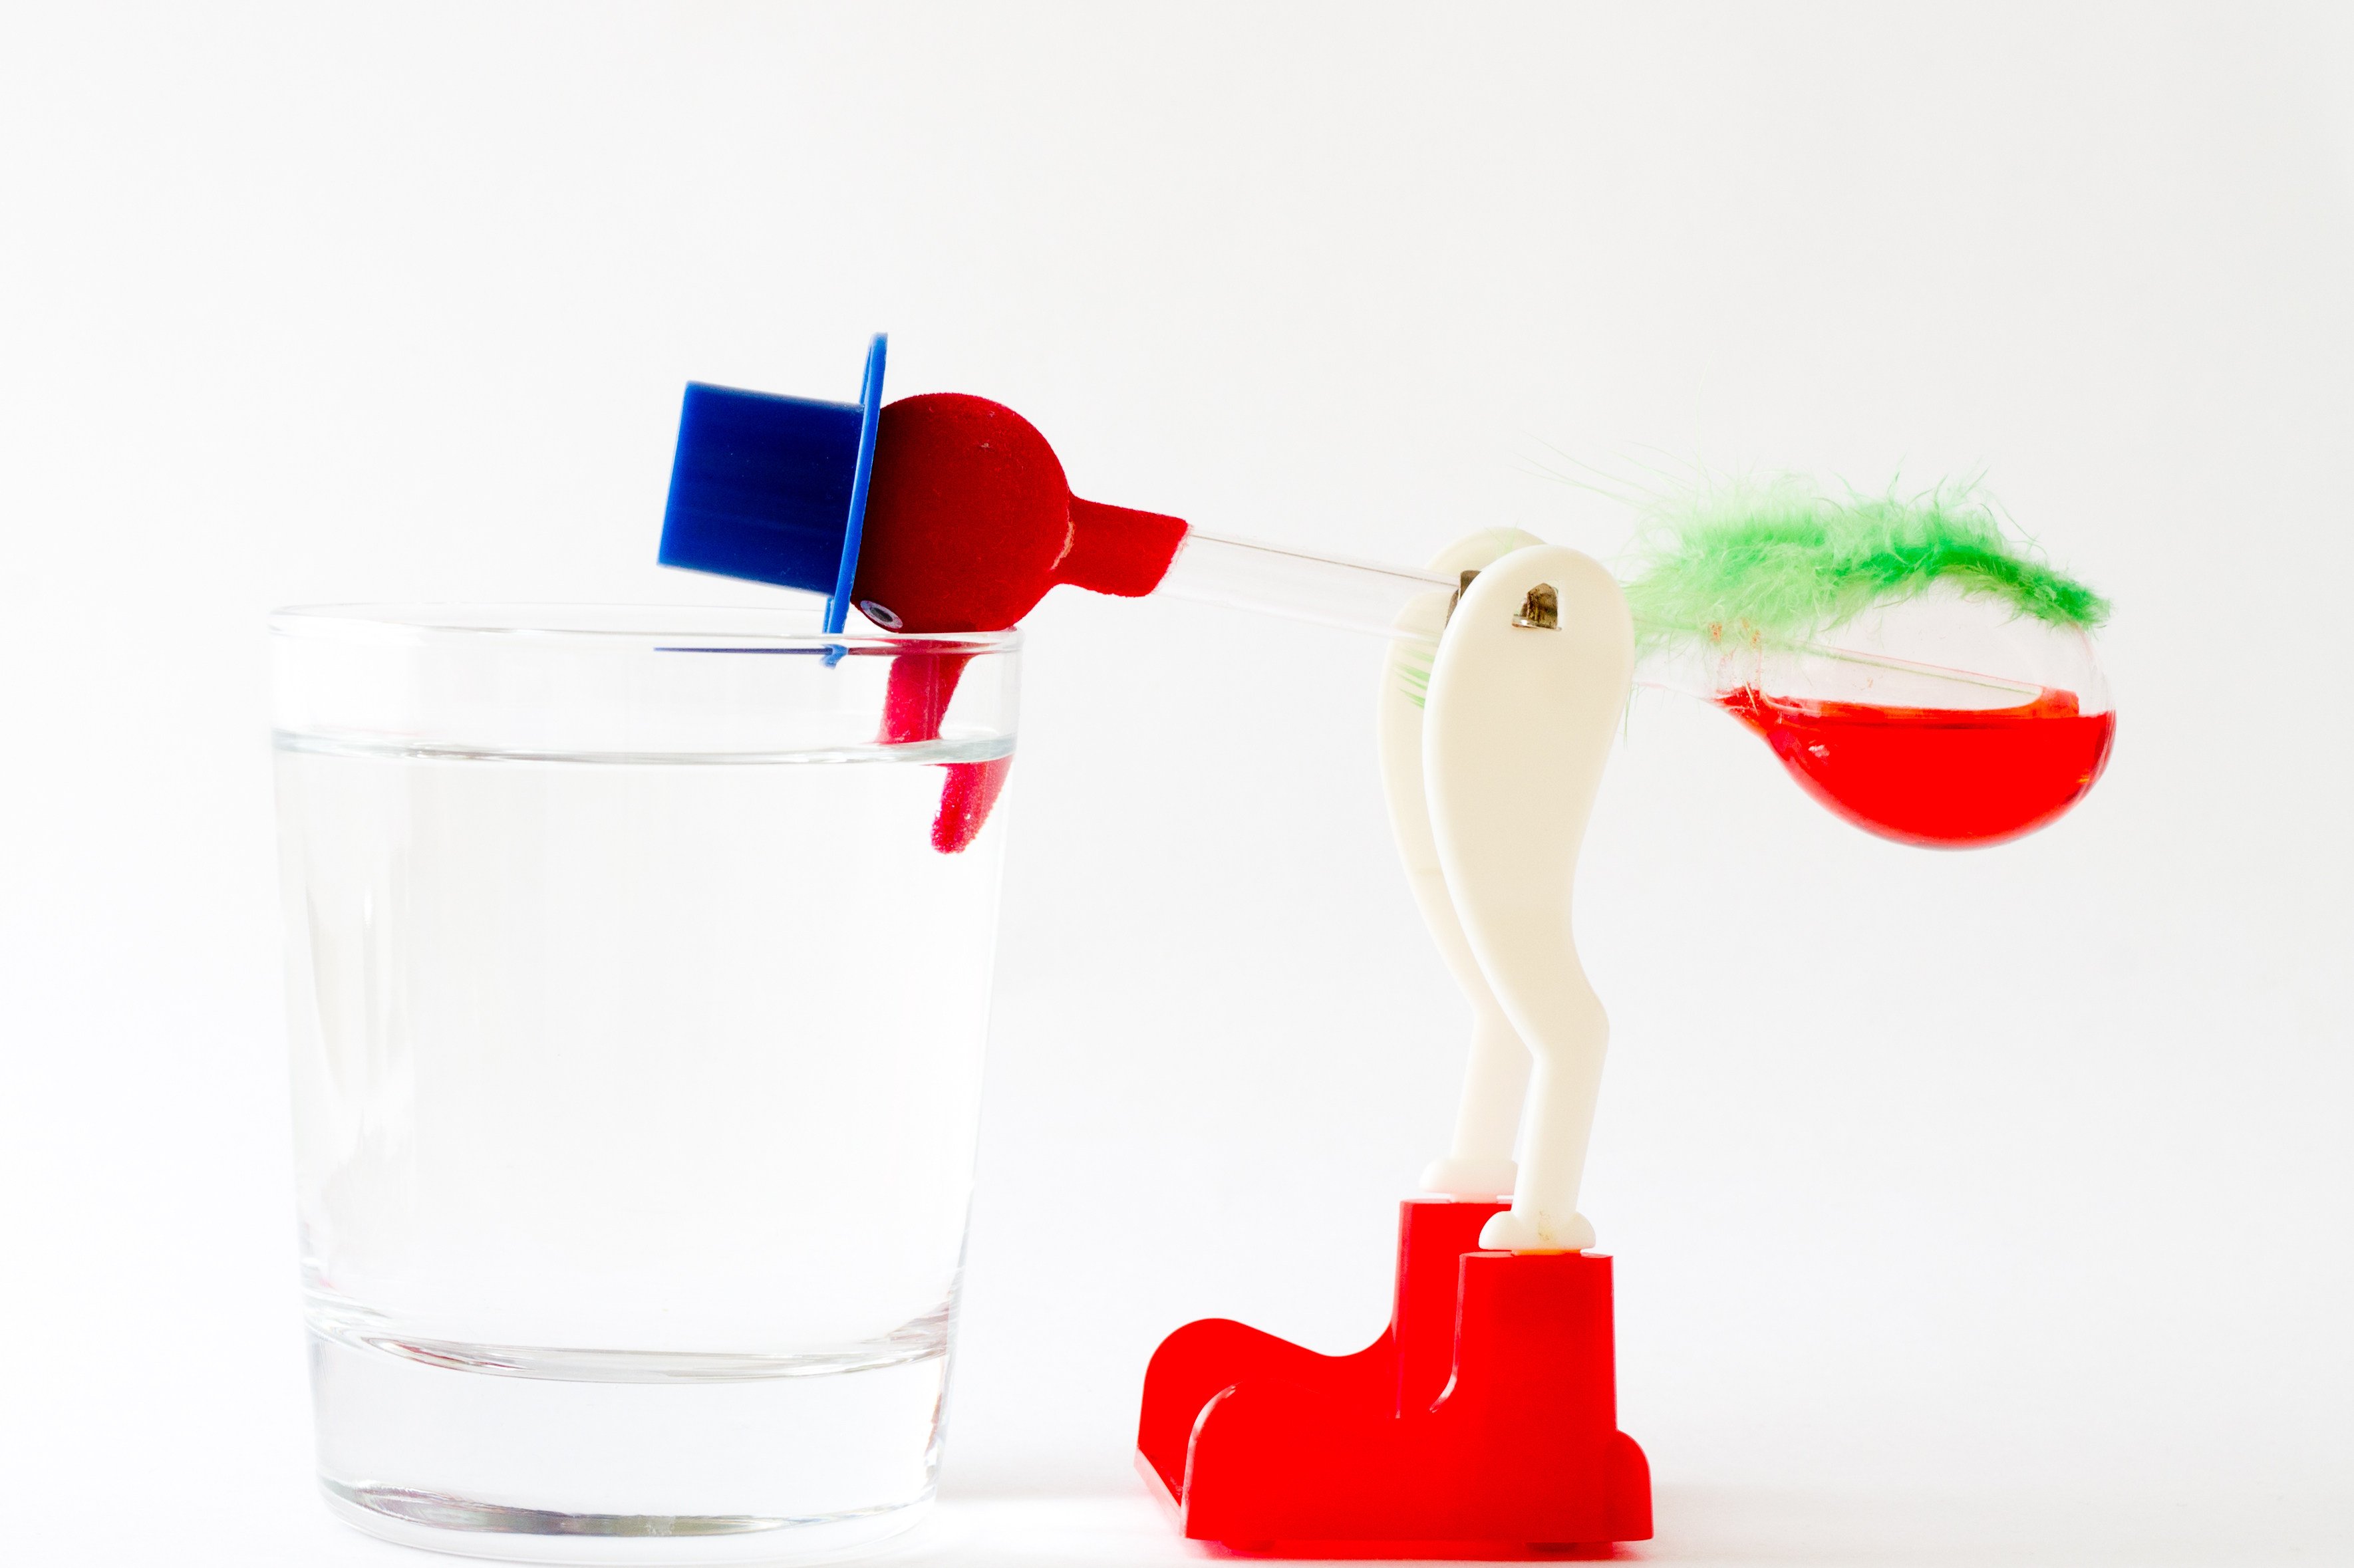 The classic scientific toy with a top hat that continuously dips into a glass of water using simple thermodynamics is leading researchers towards a new source of renewable energy. Photo: Shutterstock Images